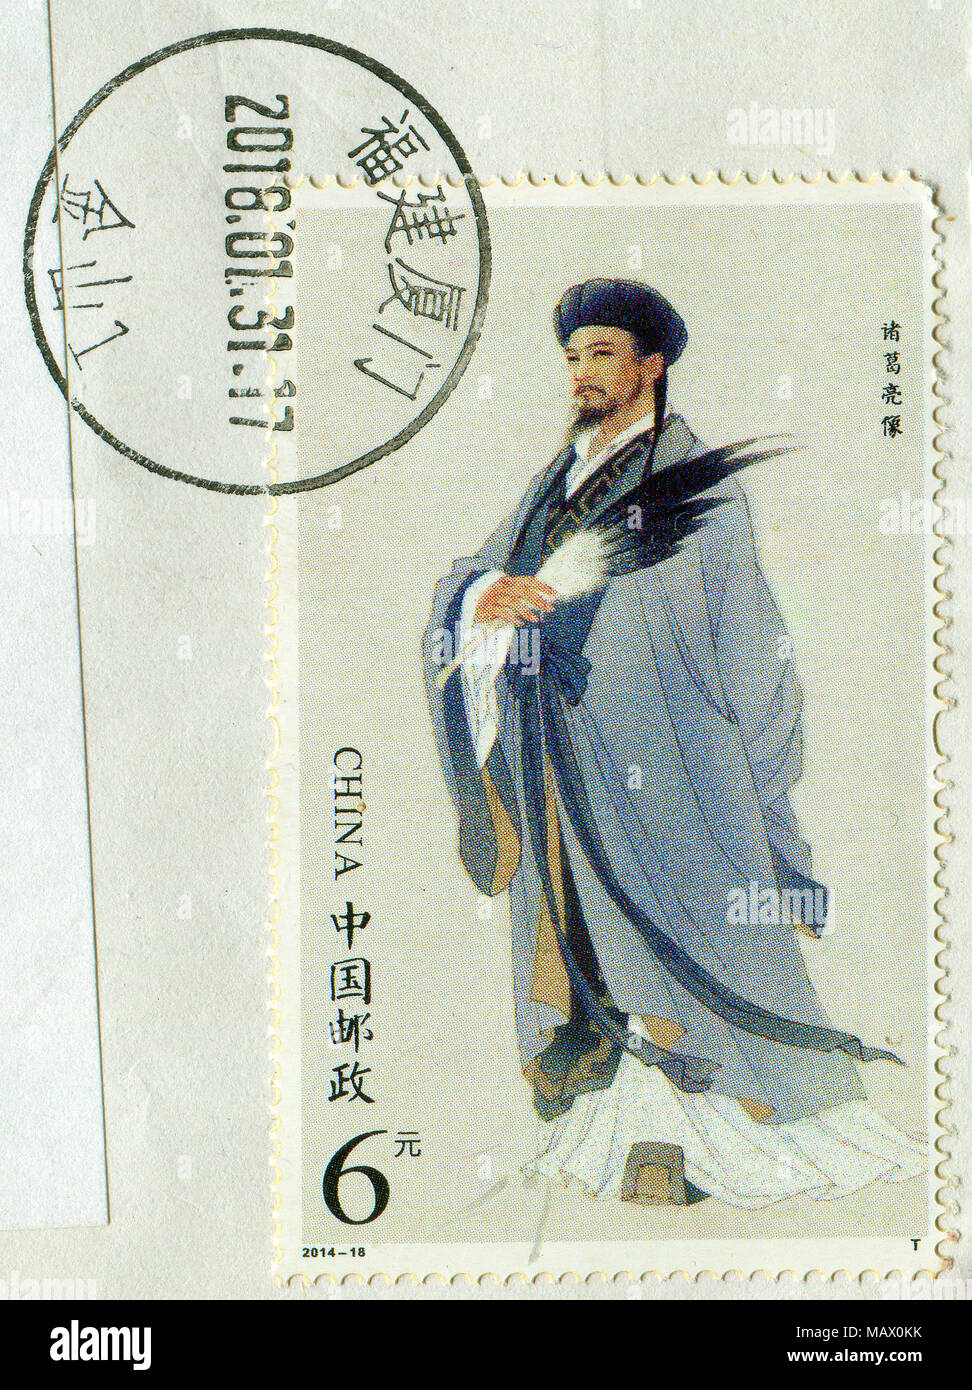 GOMEL, BELARUS, 27 OCTOBER 2017, Stamp printed in China shows image of the Three Kingdom Zhuge Liang, circa 2014. Stock Photo